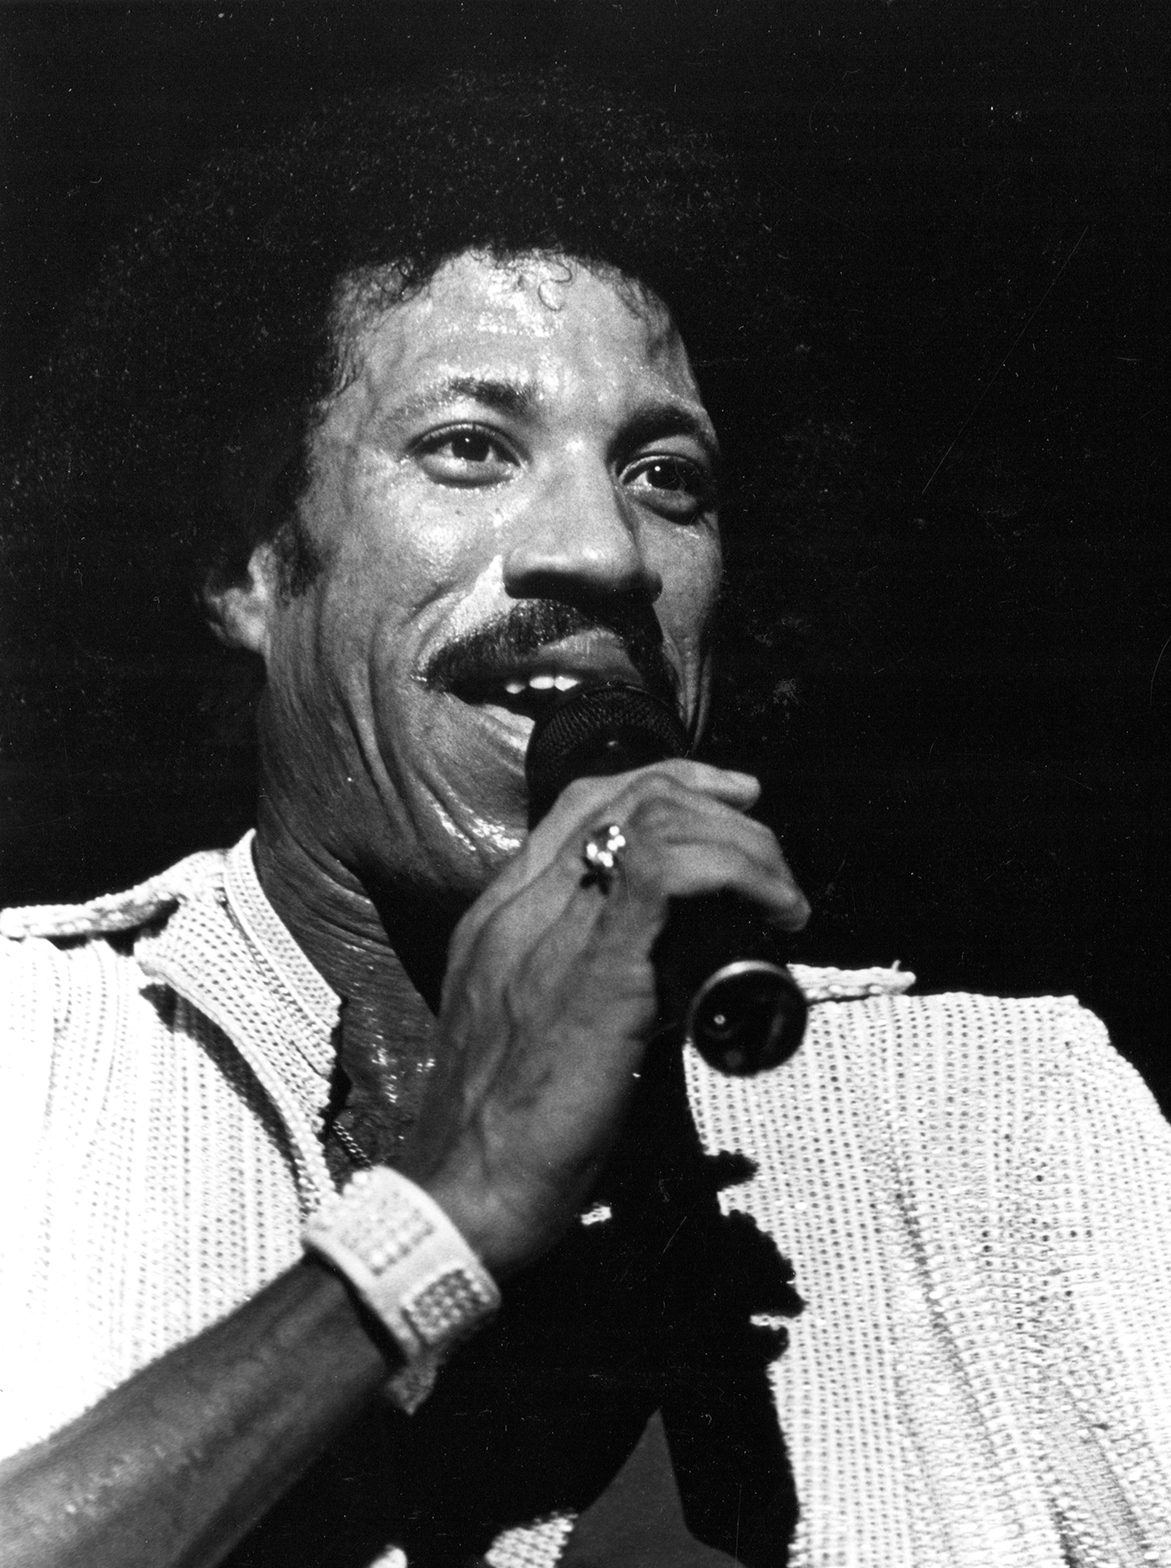 Lionel Richie on stage singing with microphone in his right hand